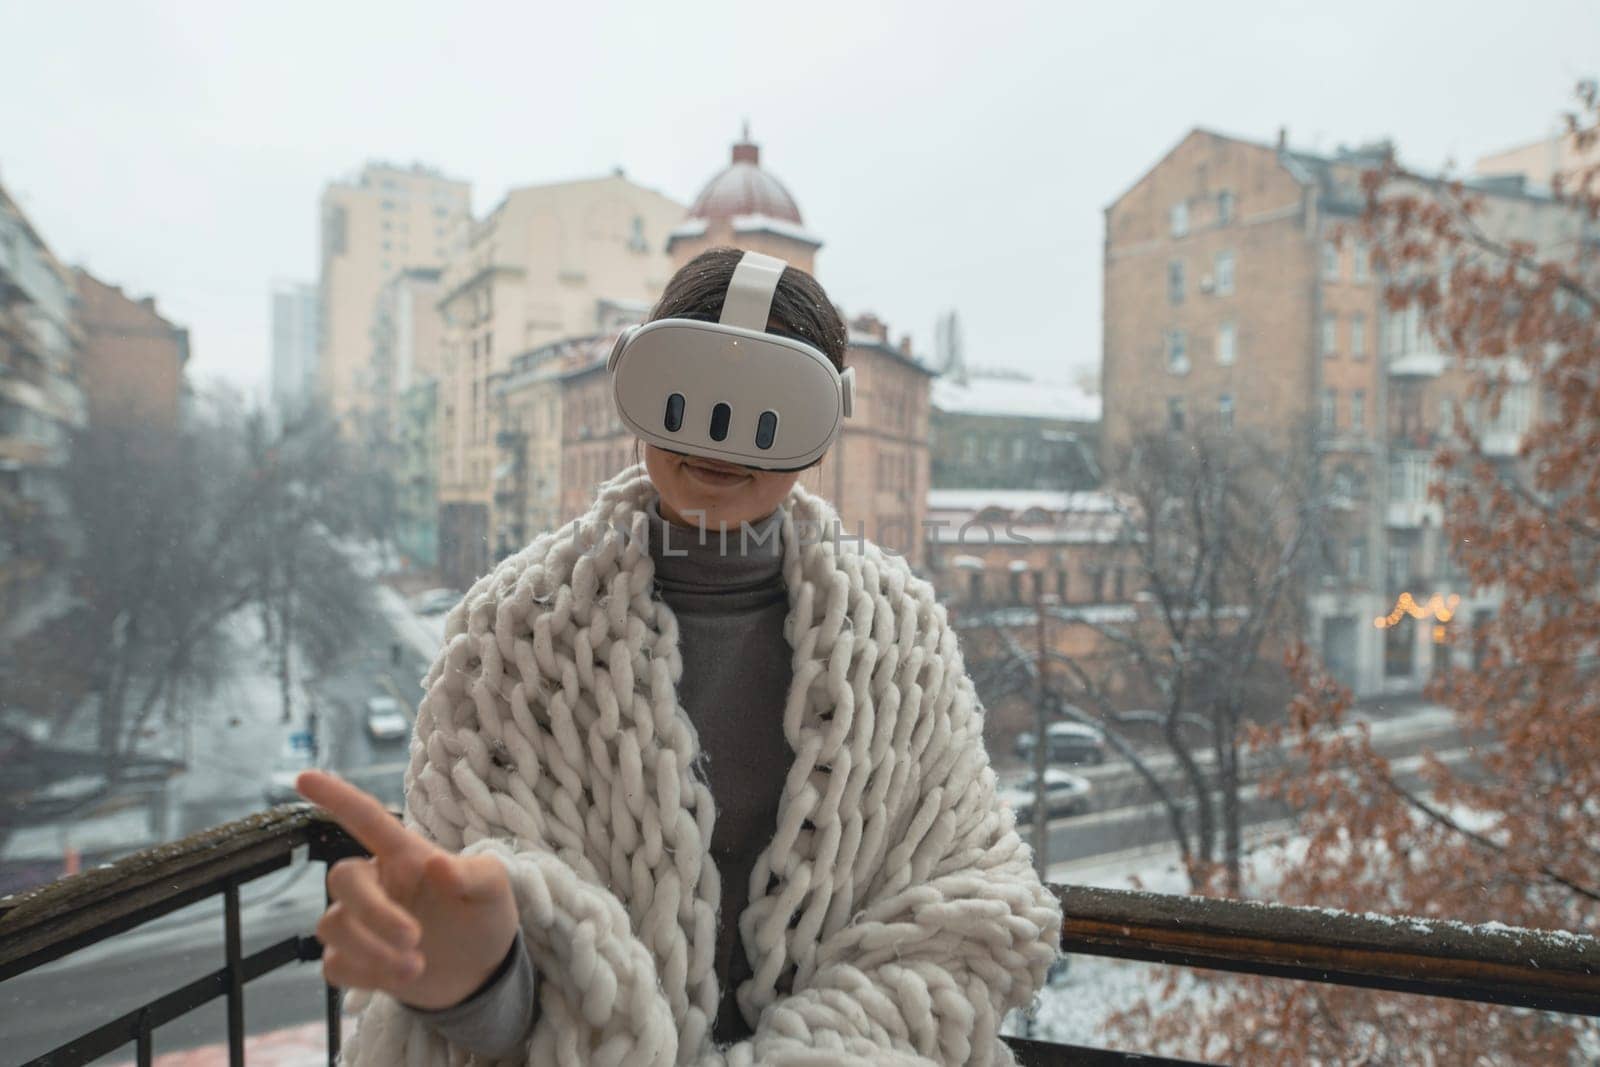 Enjoying VR experiences, a young lady dons a headset on the winter balcony. by teksomolika